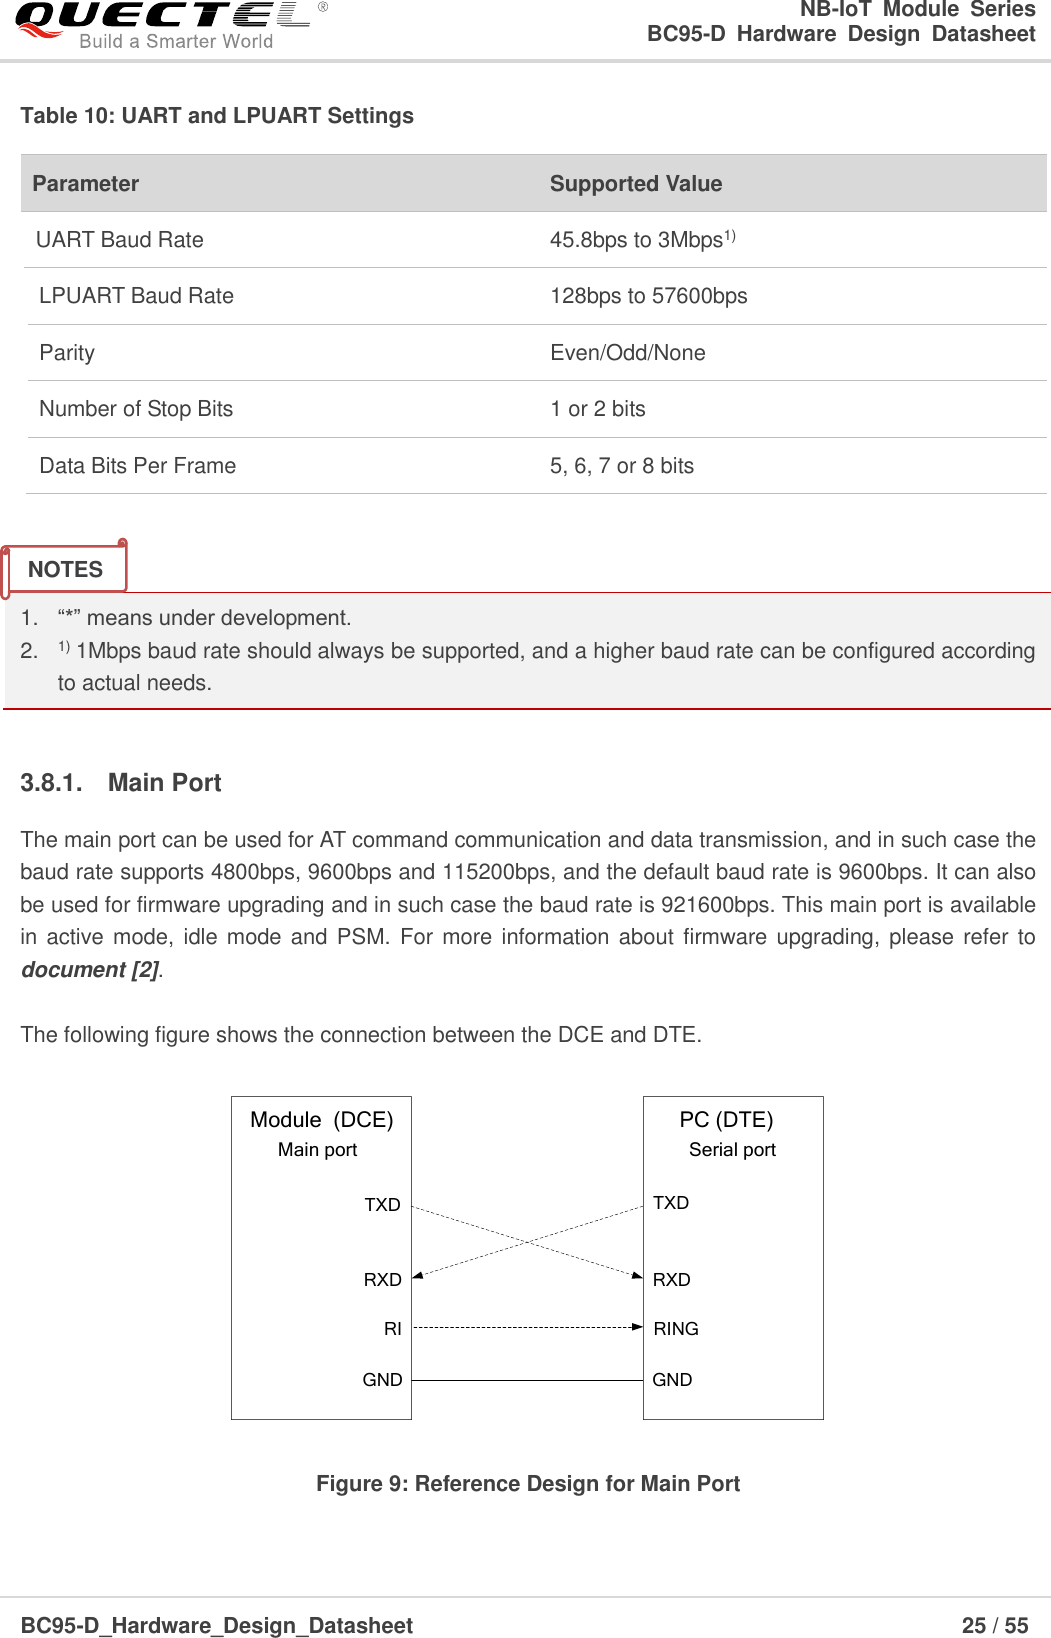                                                            NB-IoT  Module  Series                                                          BC95-D  Hardware  Design  Datasheet BC95-D_Hardware_Design_Datasheet                                                                    25 / 55    Table 10: UART and LPUART Settings   1. “*” means under development. 2. 1) 1Mbps baud rate should always be supported, and a higher baud rate can be configured according to actual needs.  3.8.1.  Main Port The main port can be used for AT command communication and data transmission, and in such case the baud rate supports 4800bps, 9600bps and 115200bps, and the default baud rate is 9600bps. It can also be used for firmware upgrading and in such case the baud rate is 921600bps. This main port is available in active mode, idle  mode and PSM. For  more information about firmware upgrading, please refer to document [2].  The following figure shows the connection between the DCE and DTE. TXDRXDRITXDRXDRINGModule  (DCE)Serial portMain portGND GNDPC (DTE) Figure 9: Reference Design for Main Port  Parameter             Supported Value UART Baud Rate                      45.8bps to 3Mbps1)  LPUART Baud Rate              128bps to 57600bps  Parity                         Even/Odd/None  Number of Stop Bits                        1 or 2 bits  Data Bits Per Frame                        5, 6, 7 or 8 bits  NOTES 